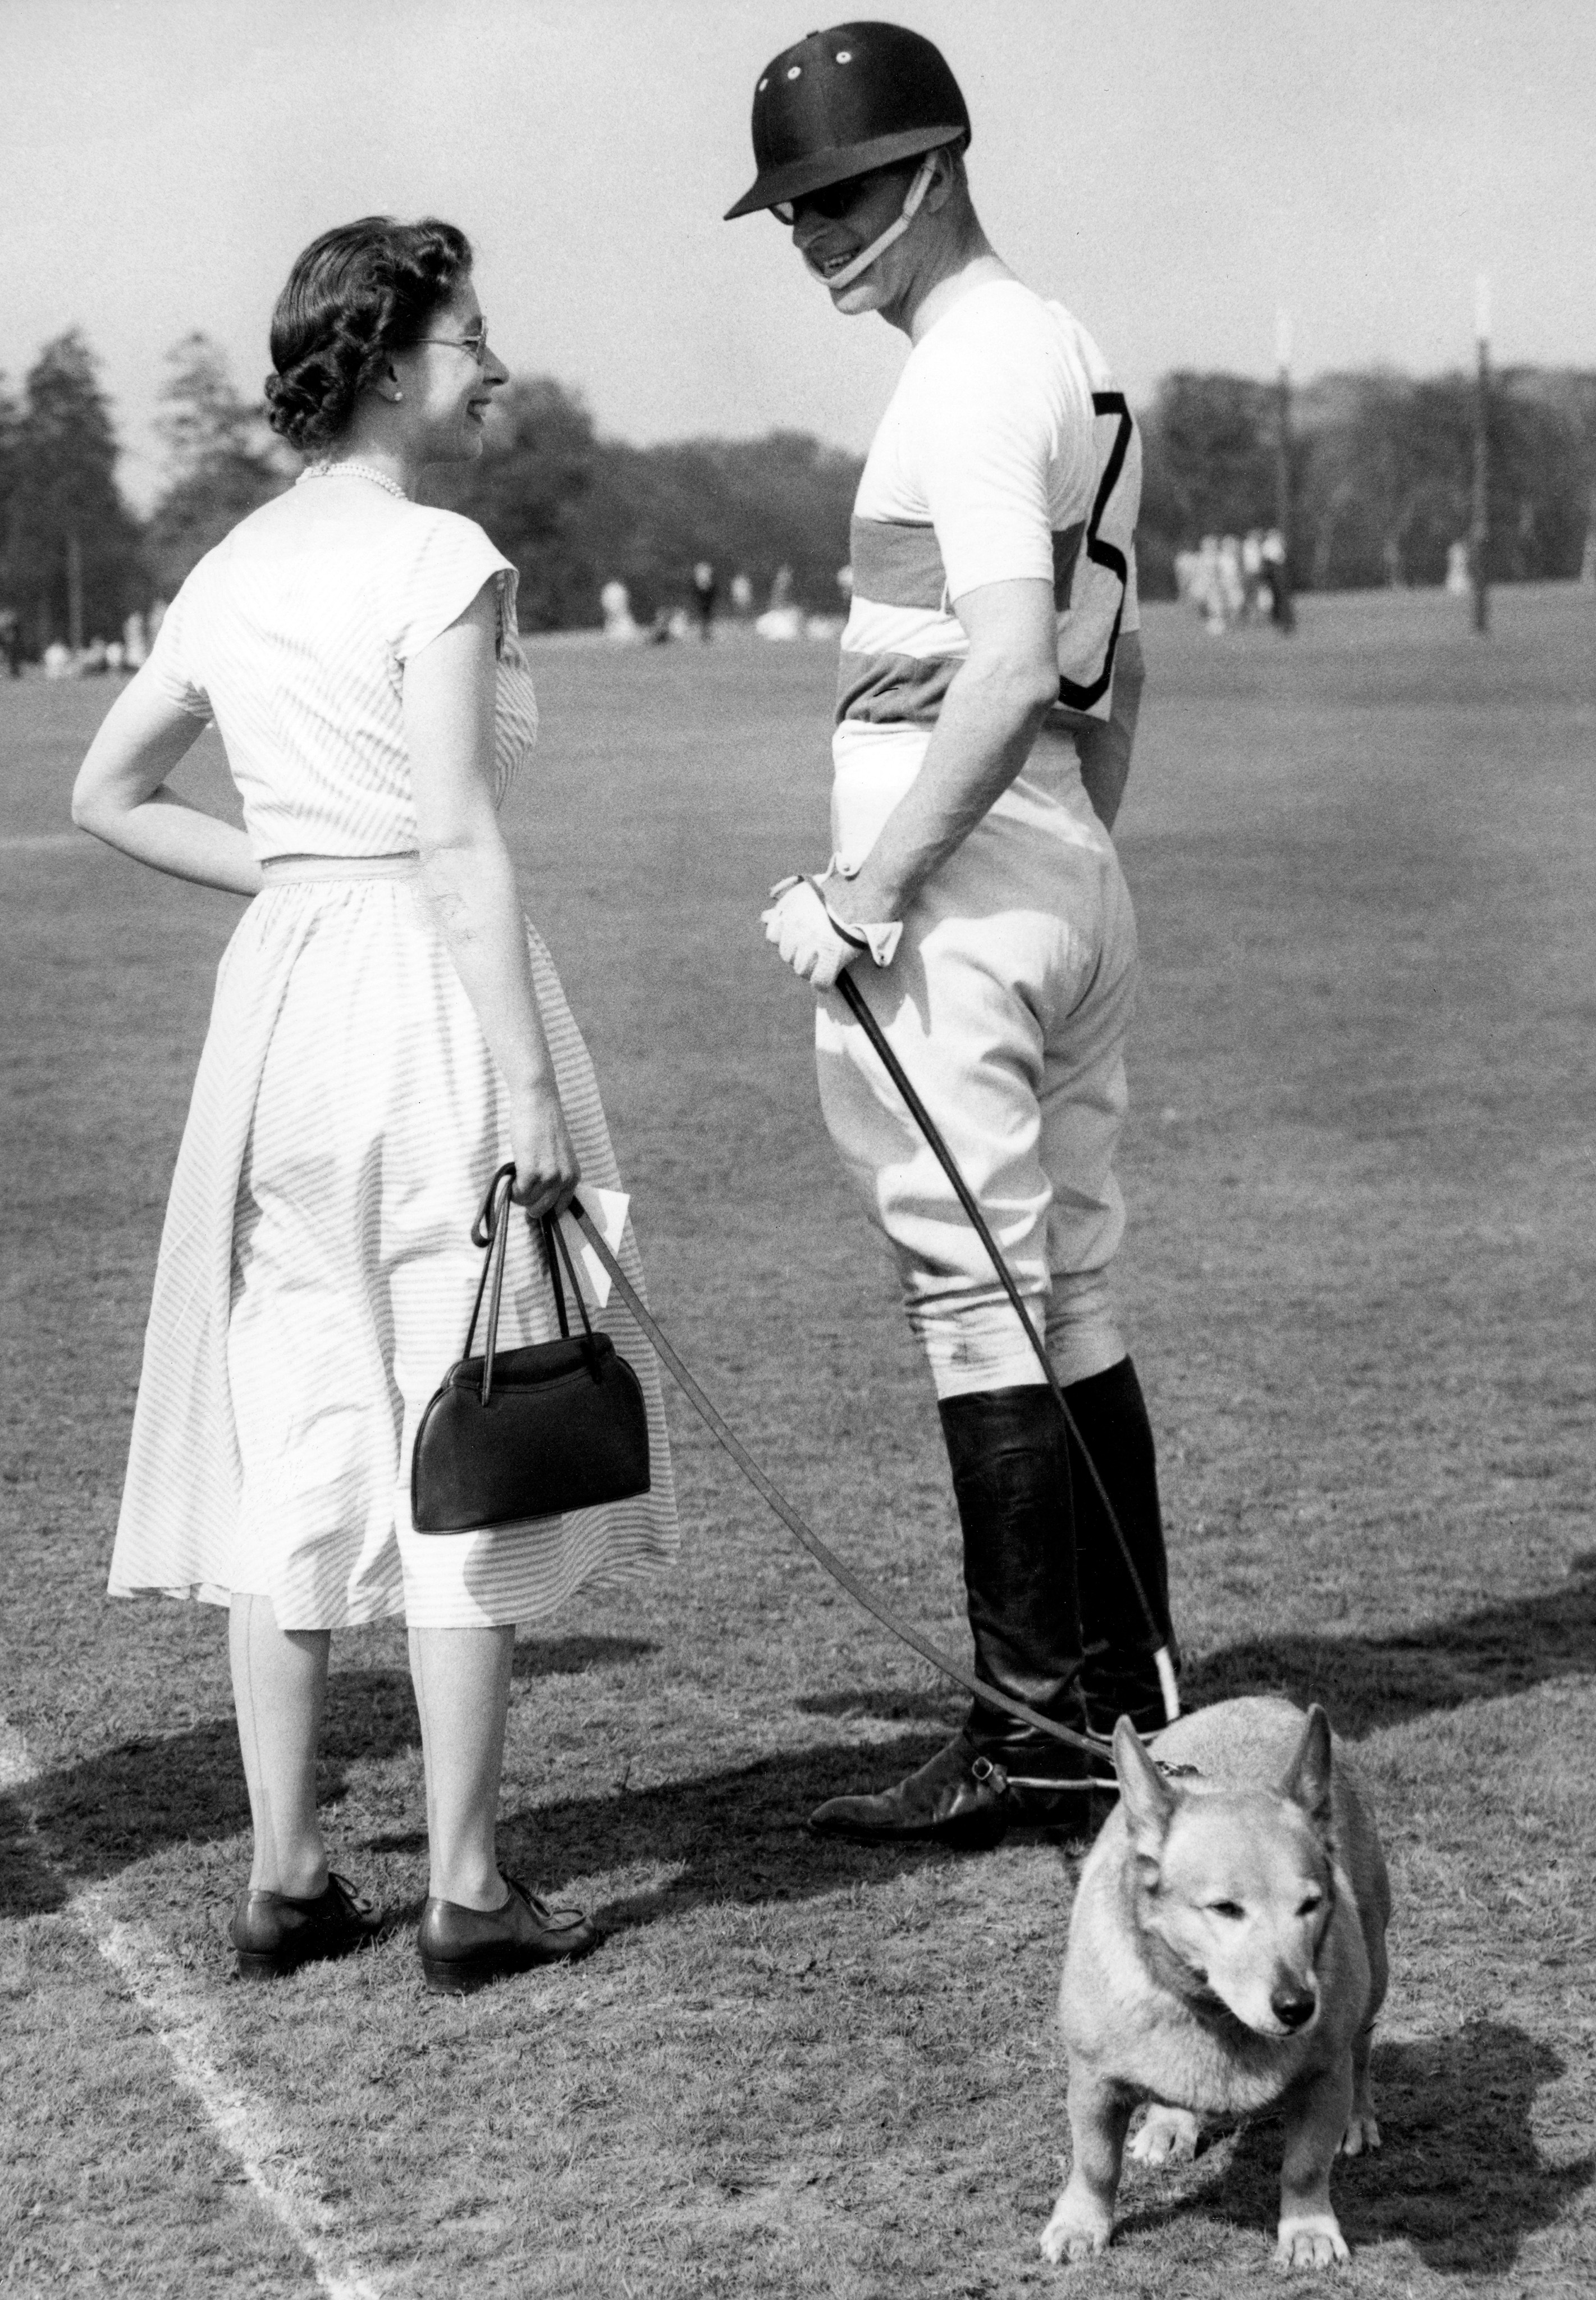 Queen Elizabeth II with one the Royal corgis, chats with polo-playing Prince Philip